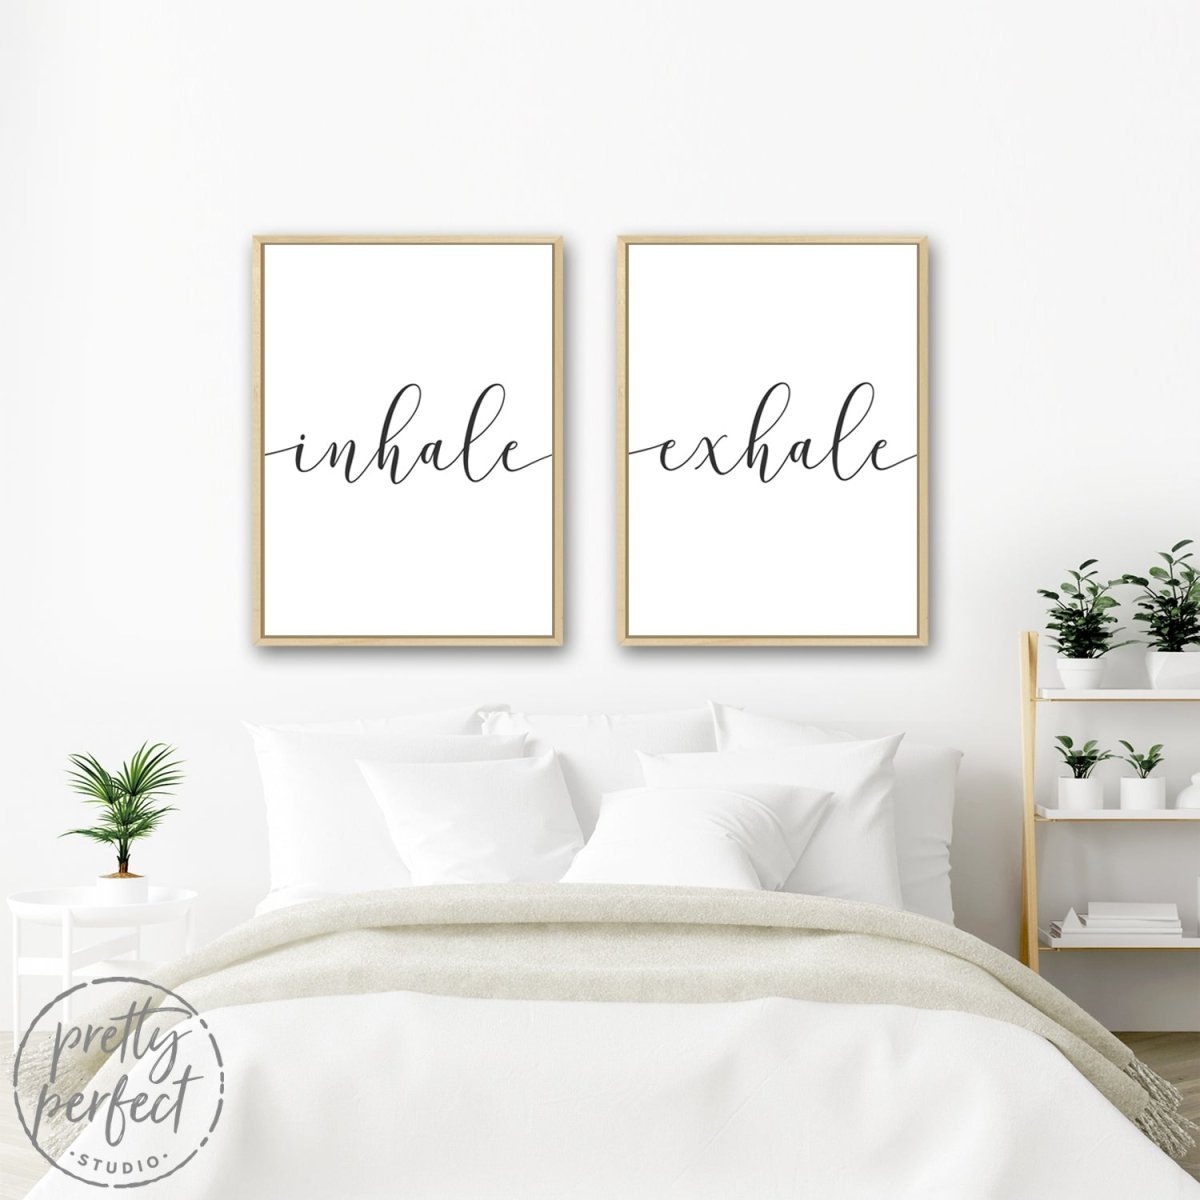 Inhale Exhale Wall Art Hanging in Bedroom Above Bed - Pretty Perfect Studio